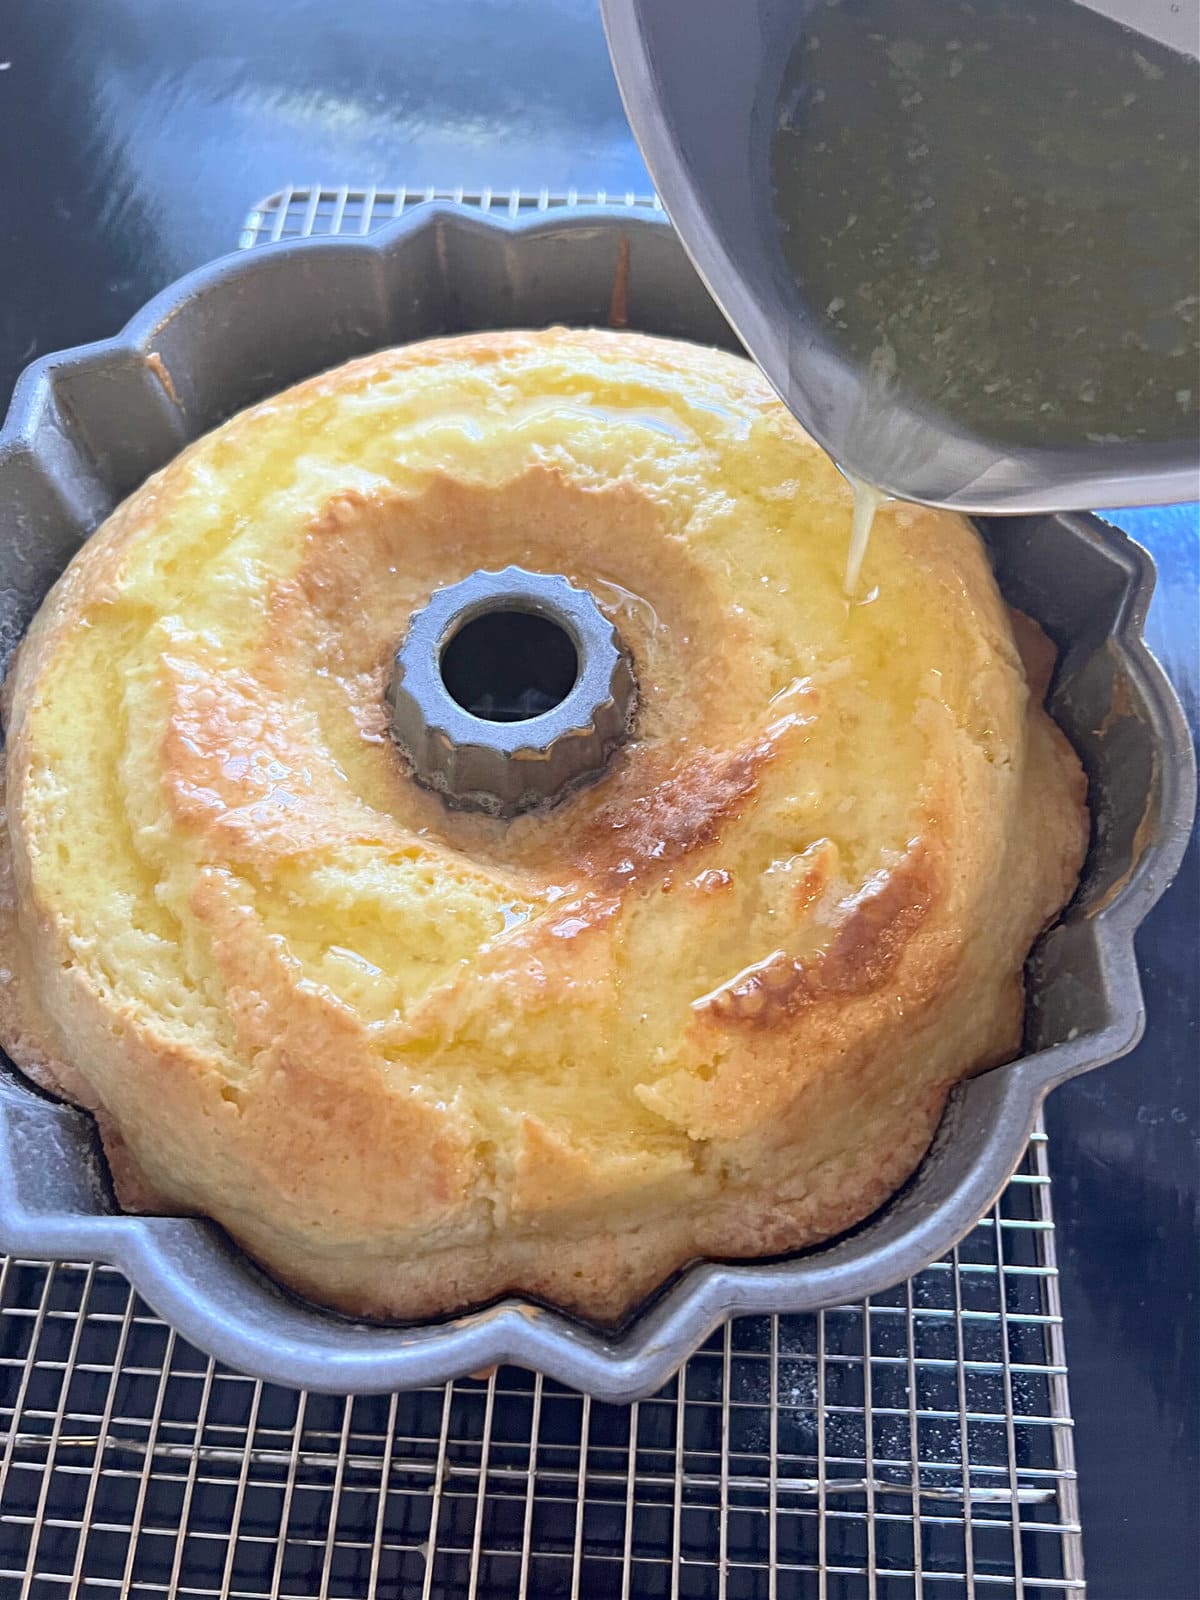 Pouring the Limoncello Glaze over the freshly baked cake, still in the pan.